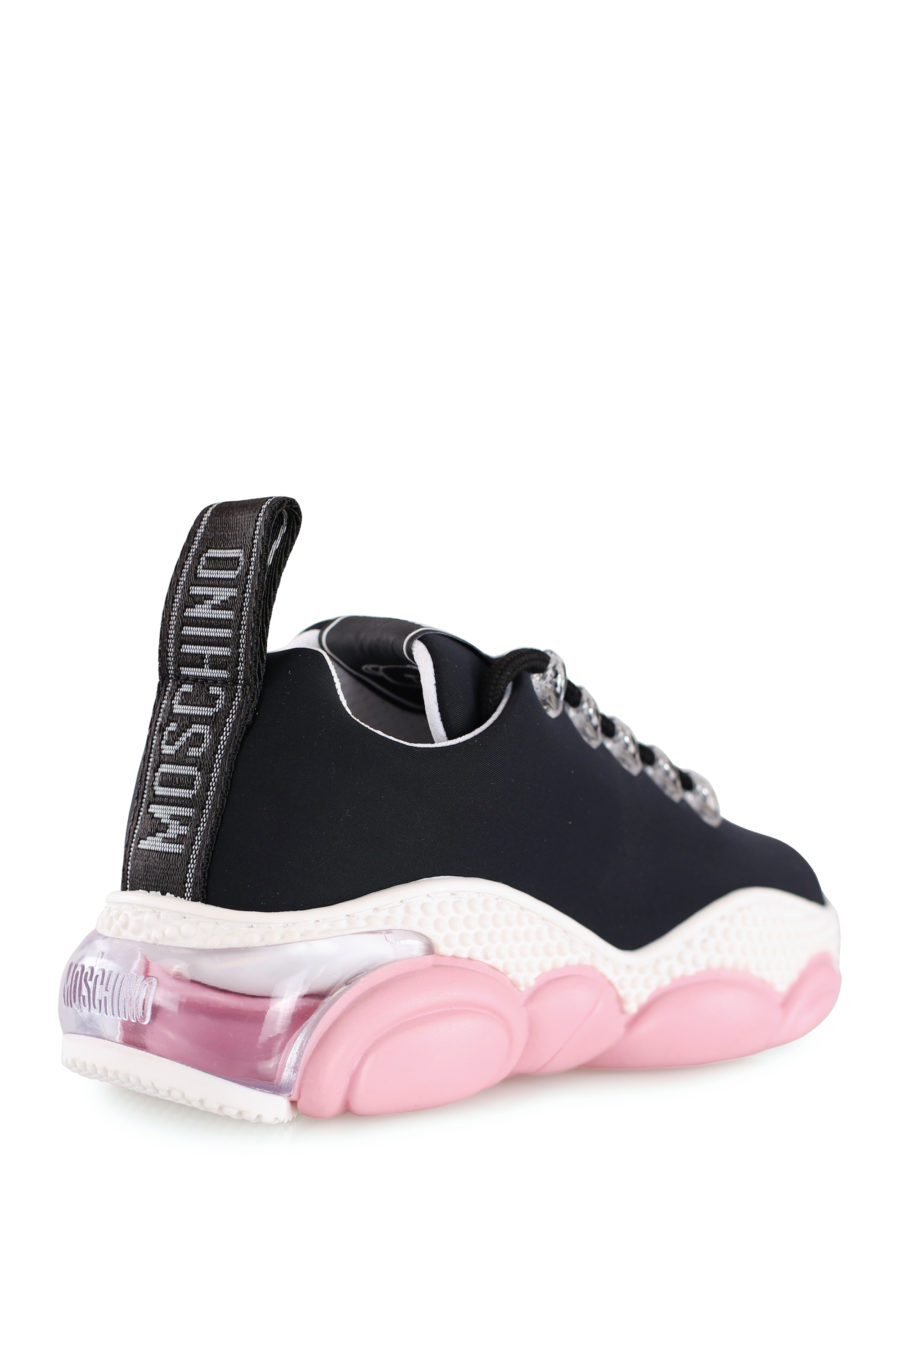 Black trainers with pink sole - IMG 8133 copy